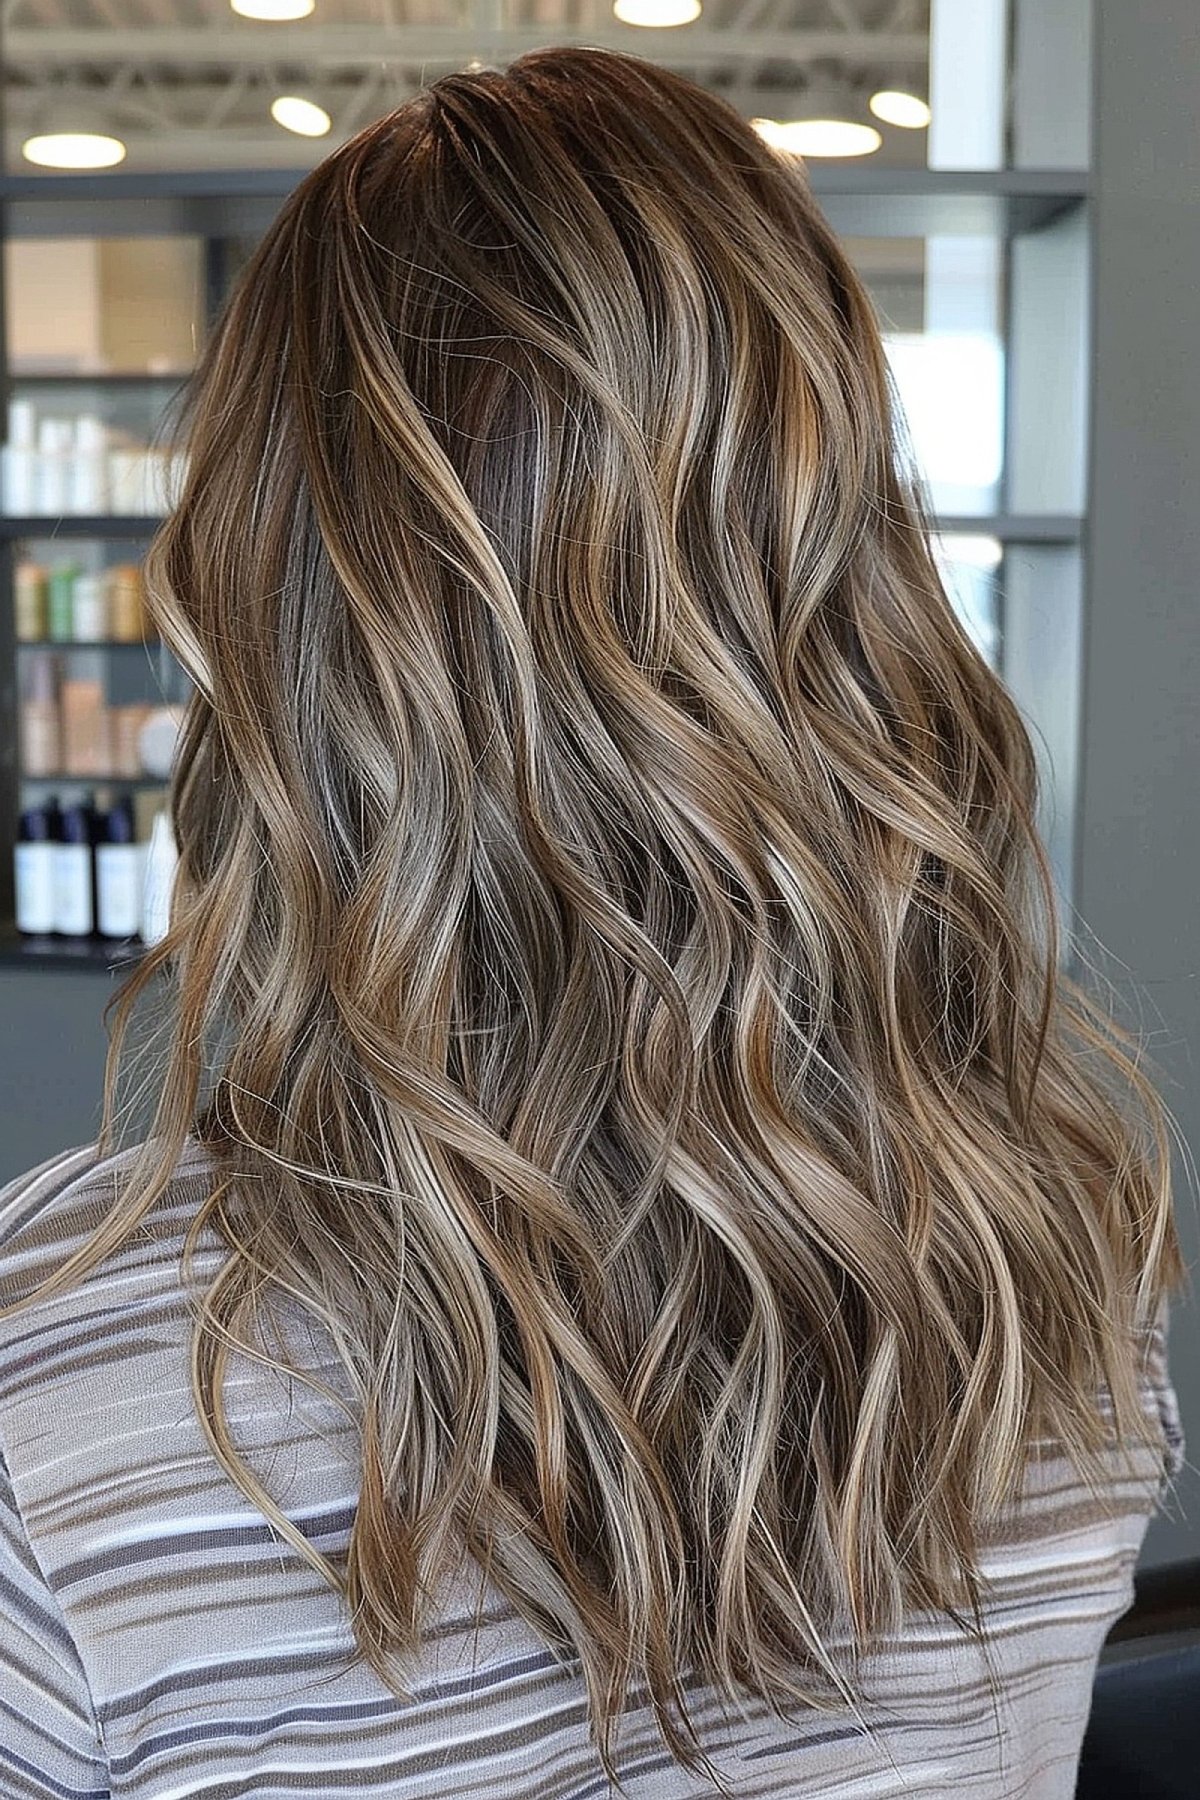 Long wavy warm brown hair with cool-toned highlights